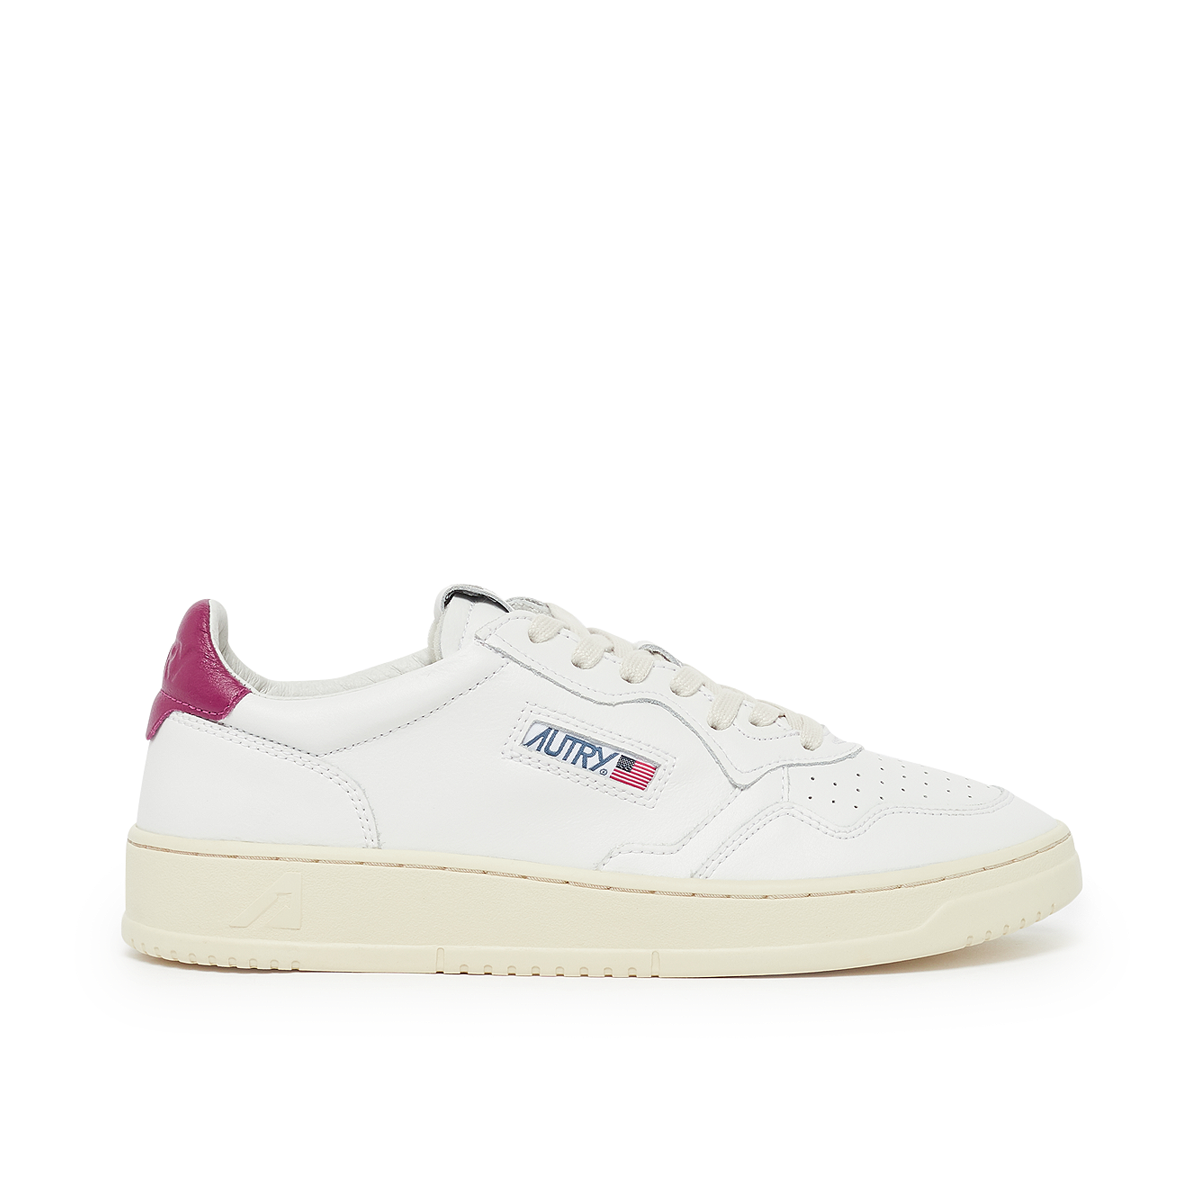 Autry Action Shoes Wmns Medalist 1 Low - AULWLL43